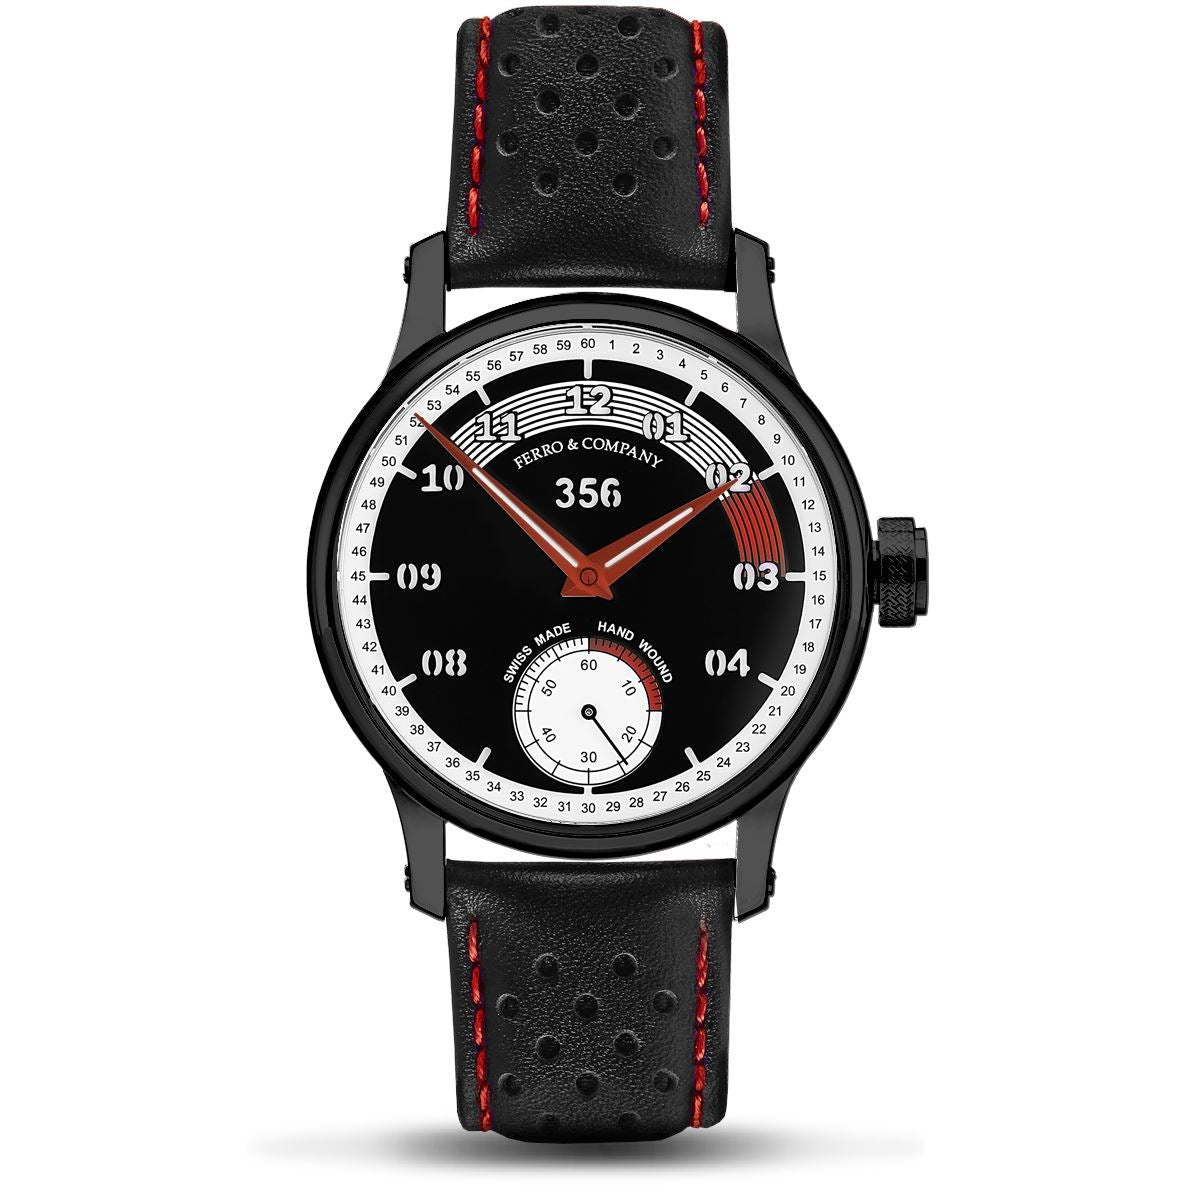 Ferro Watches 356 Vintage Style Race Watch Black / Red - Ferro &amp; Company Watches